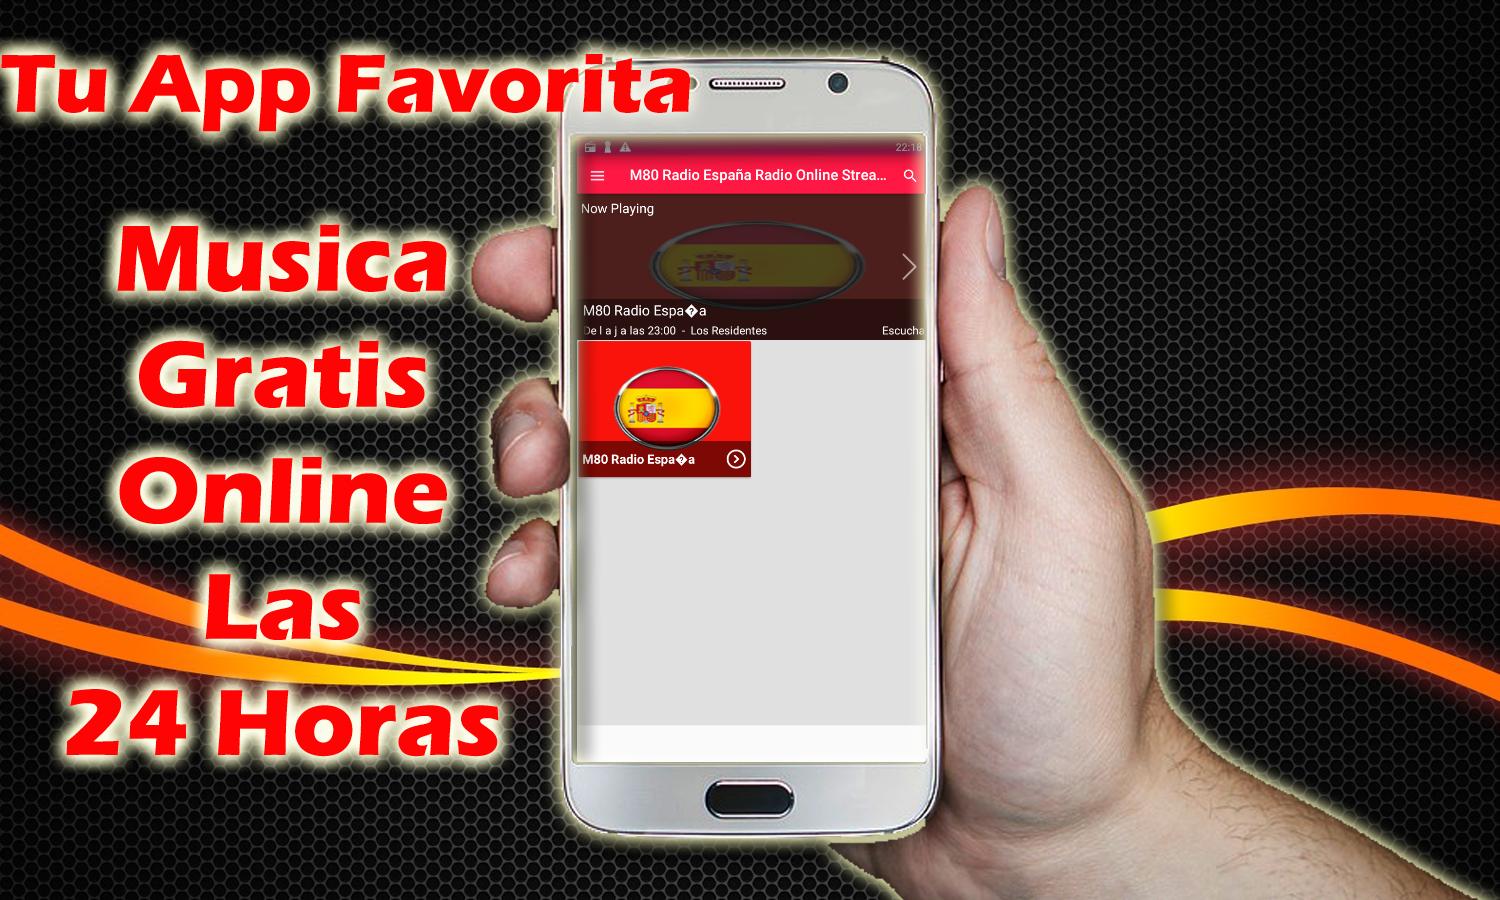 M80 Radio España Radio Online Streaming for Android - APK Download